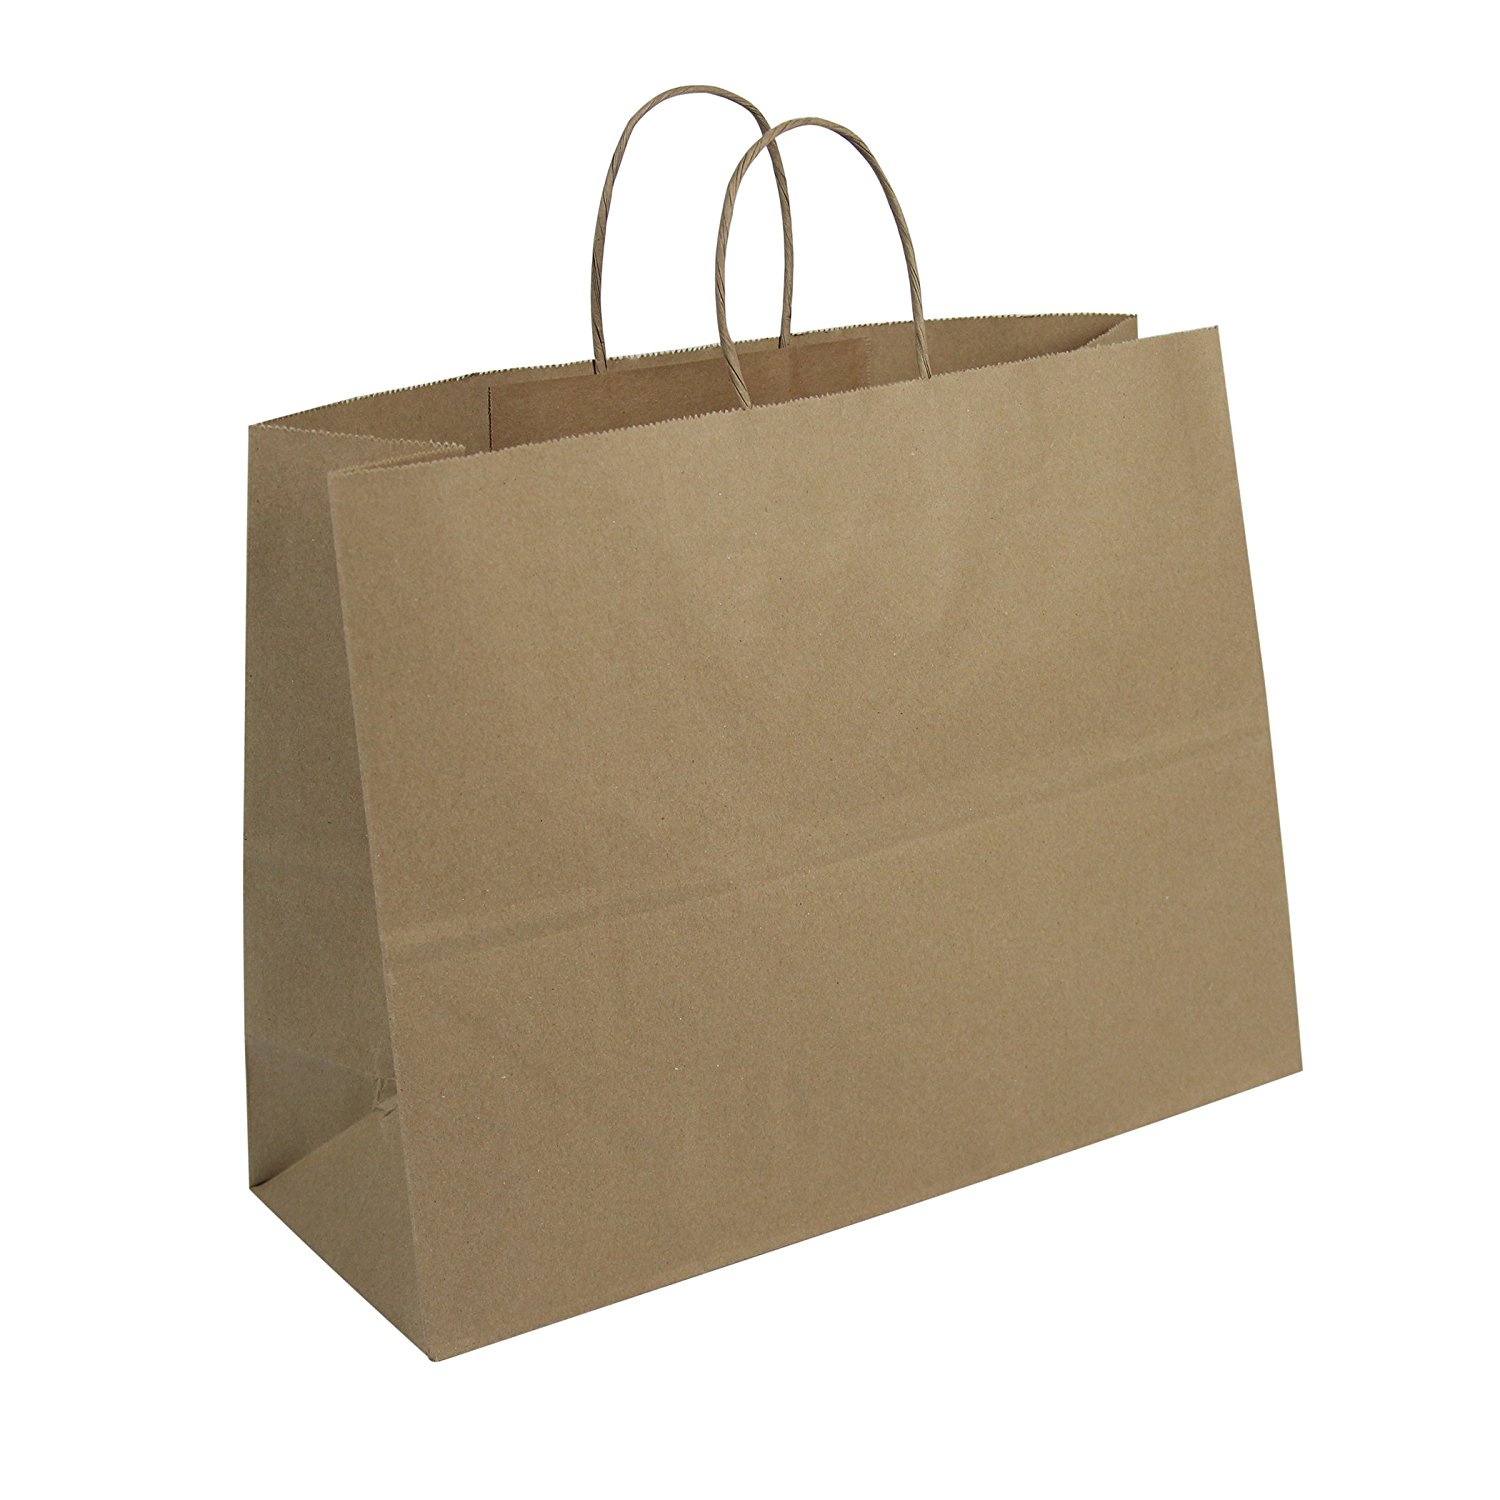 Amazon.com: Duro ID# 87129 Tote Shopping Bag 65# 100% Recycled ...